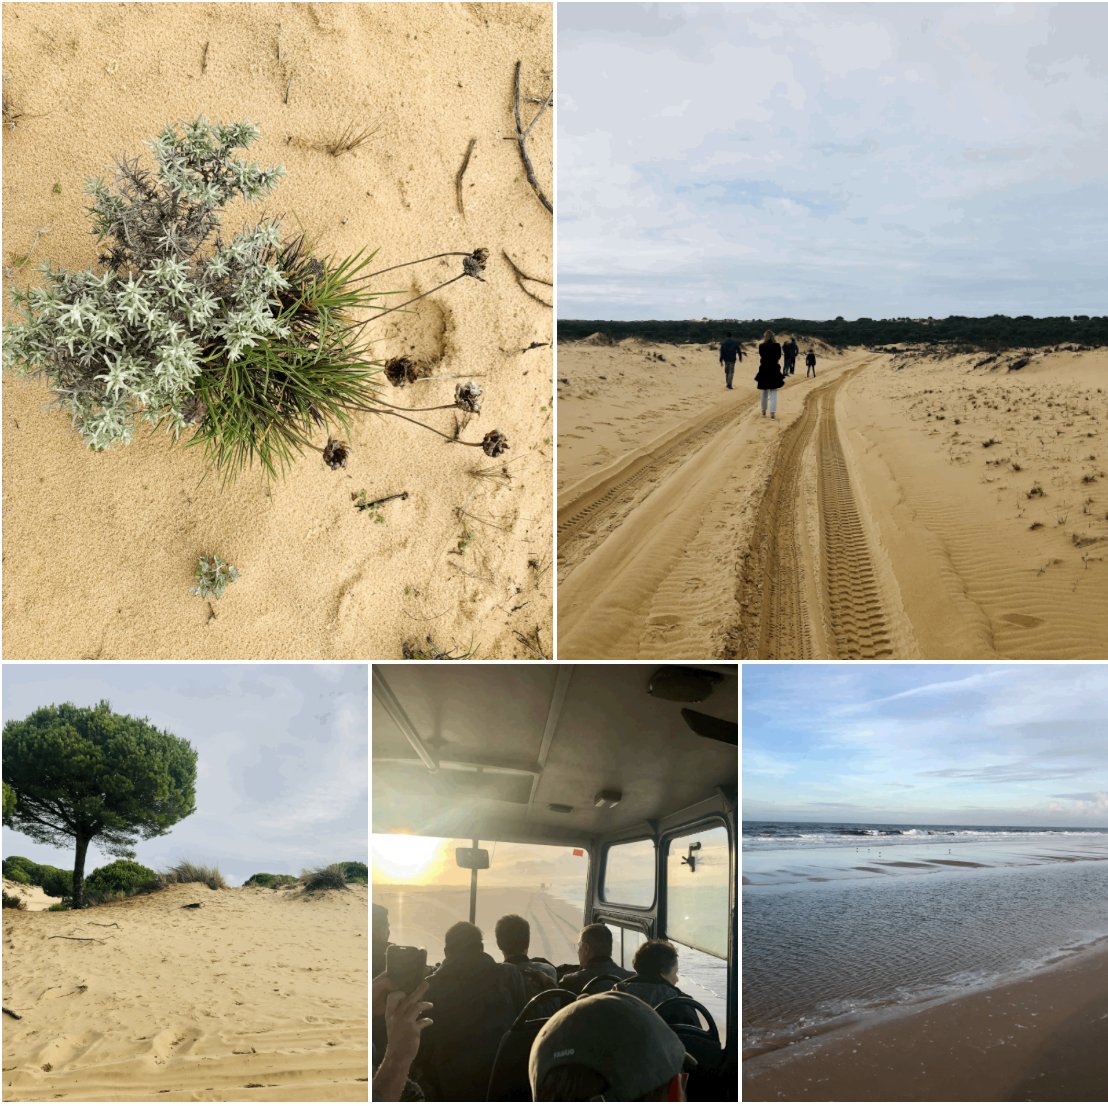 Had a beautiful, day-long excursion to @ebdonana Doñana Biological Station - CSIC today! #NatureConnects #SandDunes #VulnerableEcosystems #Doñana #awesometeam